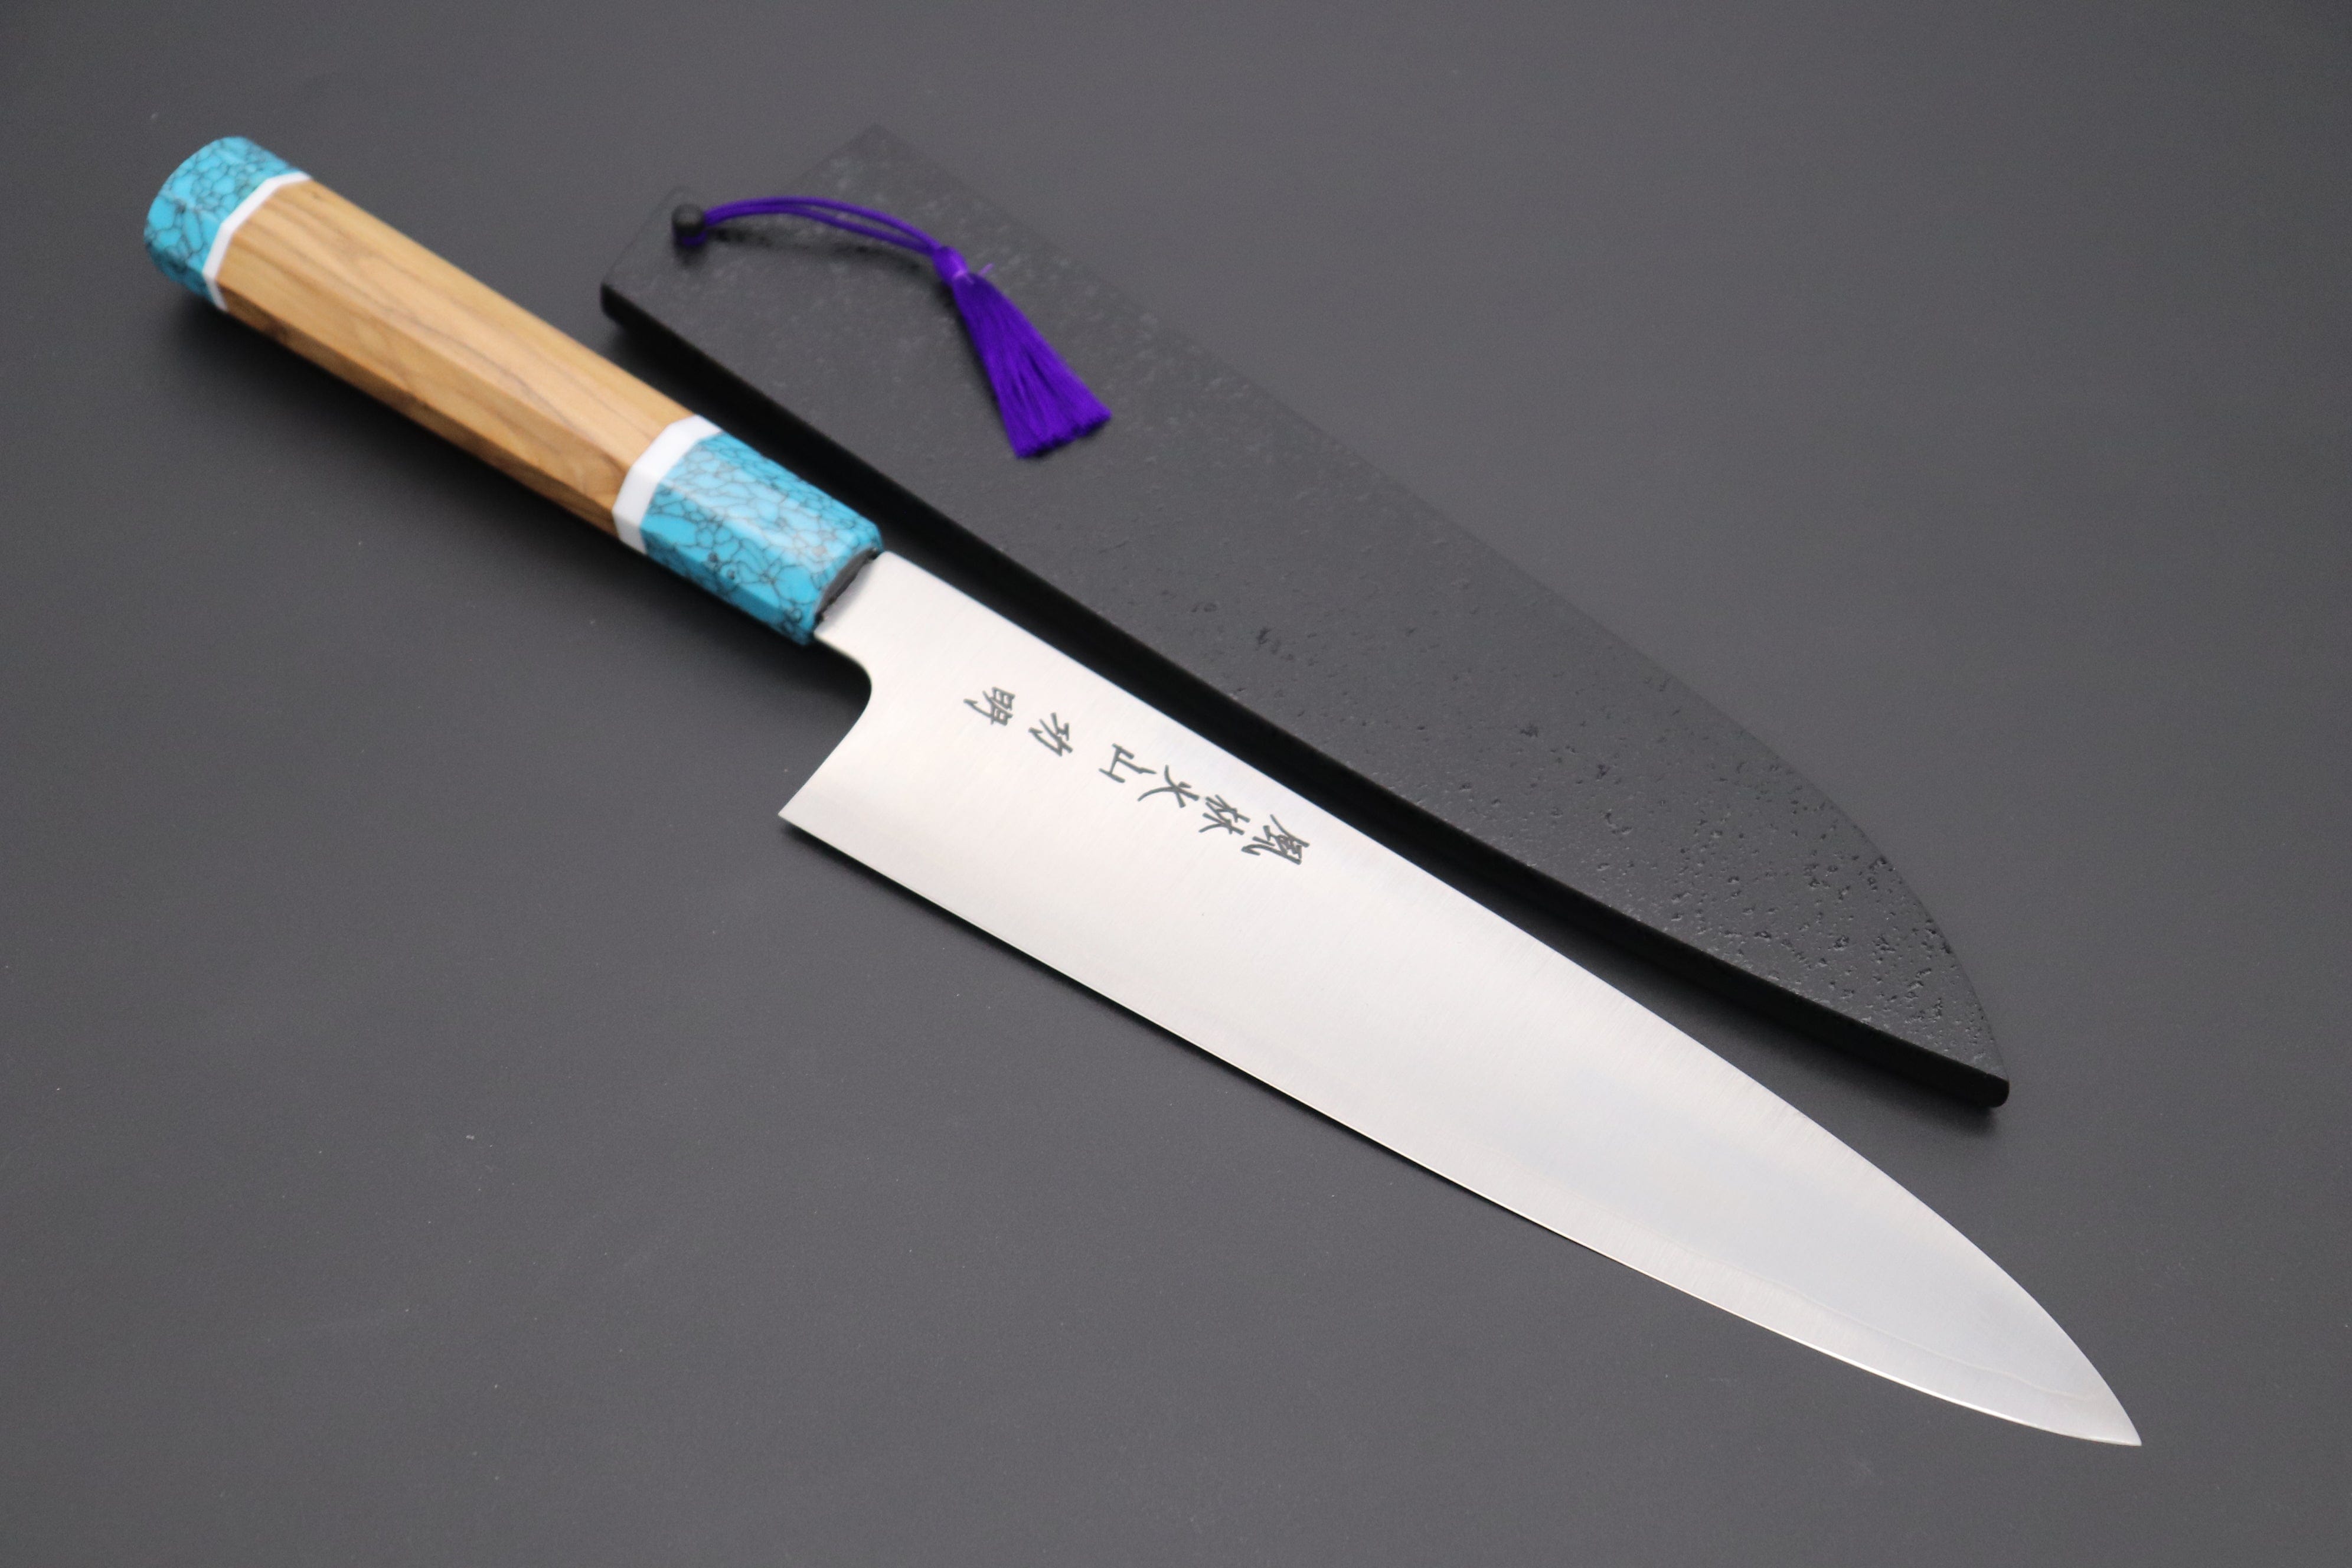 TURWHO Japanese Hand Forged Chef Knives 3 Layers Composite Steel